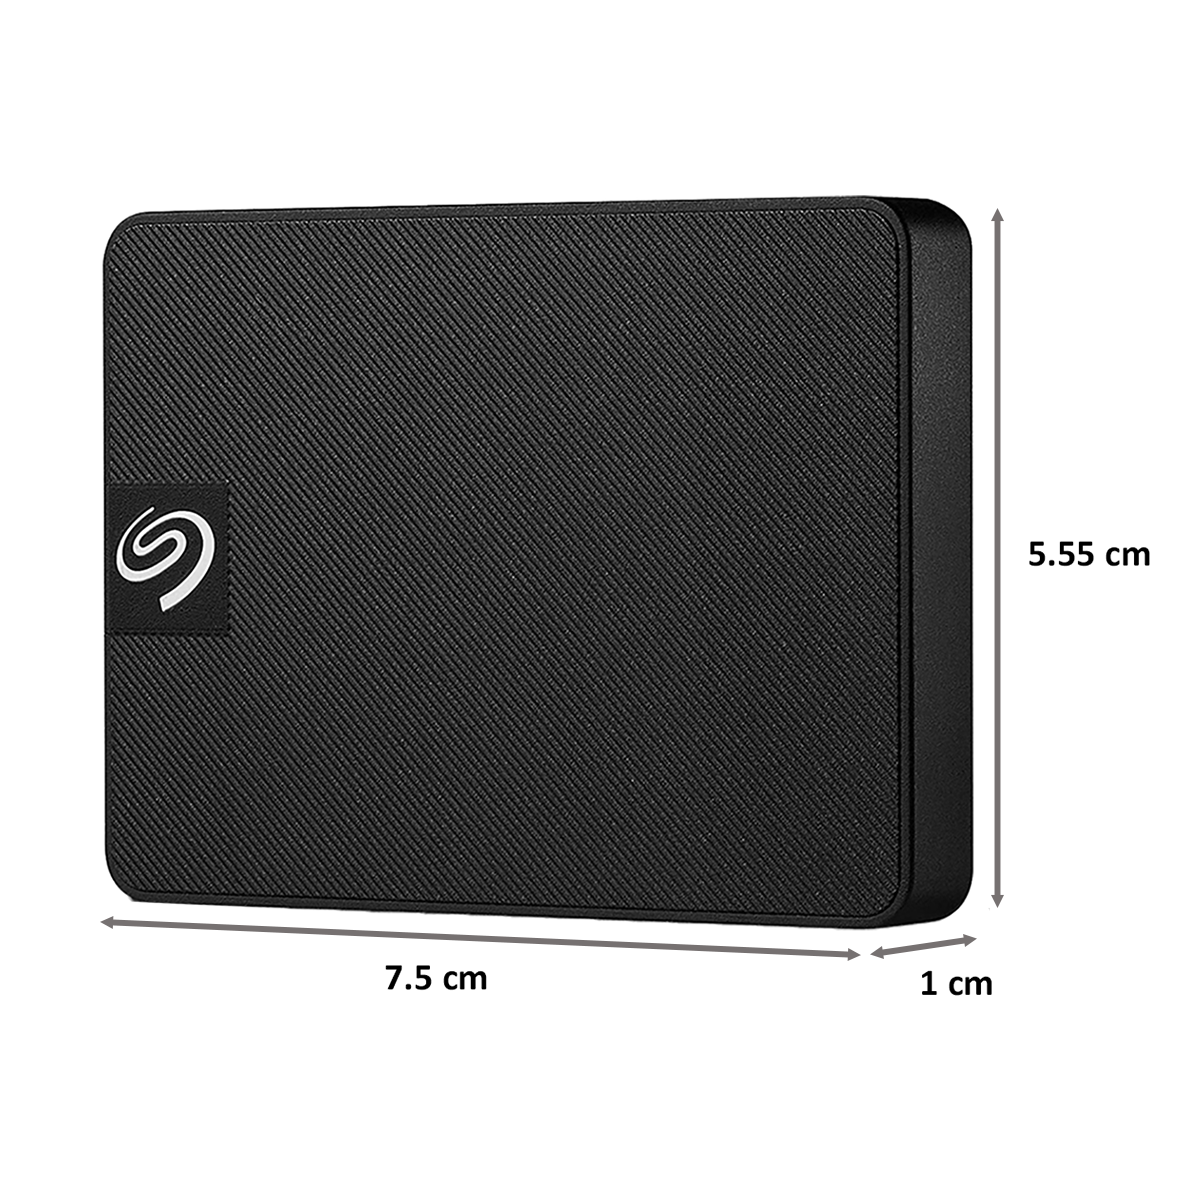 Seagate Expansion 500GB USB 3.0 Solid State Drive (Universal Compatibility, STJD500400, Black)_2